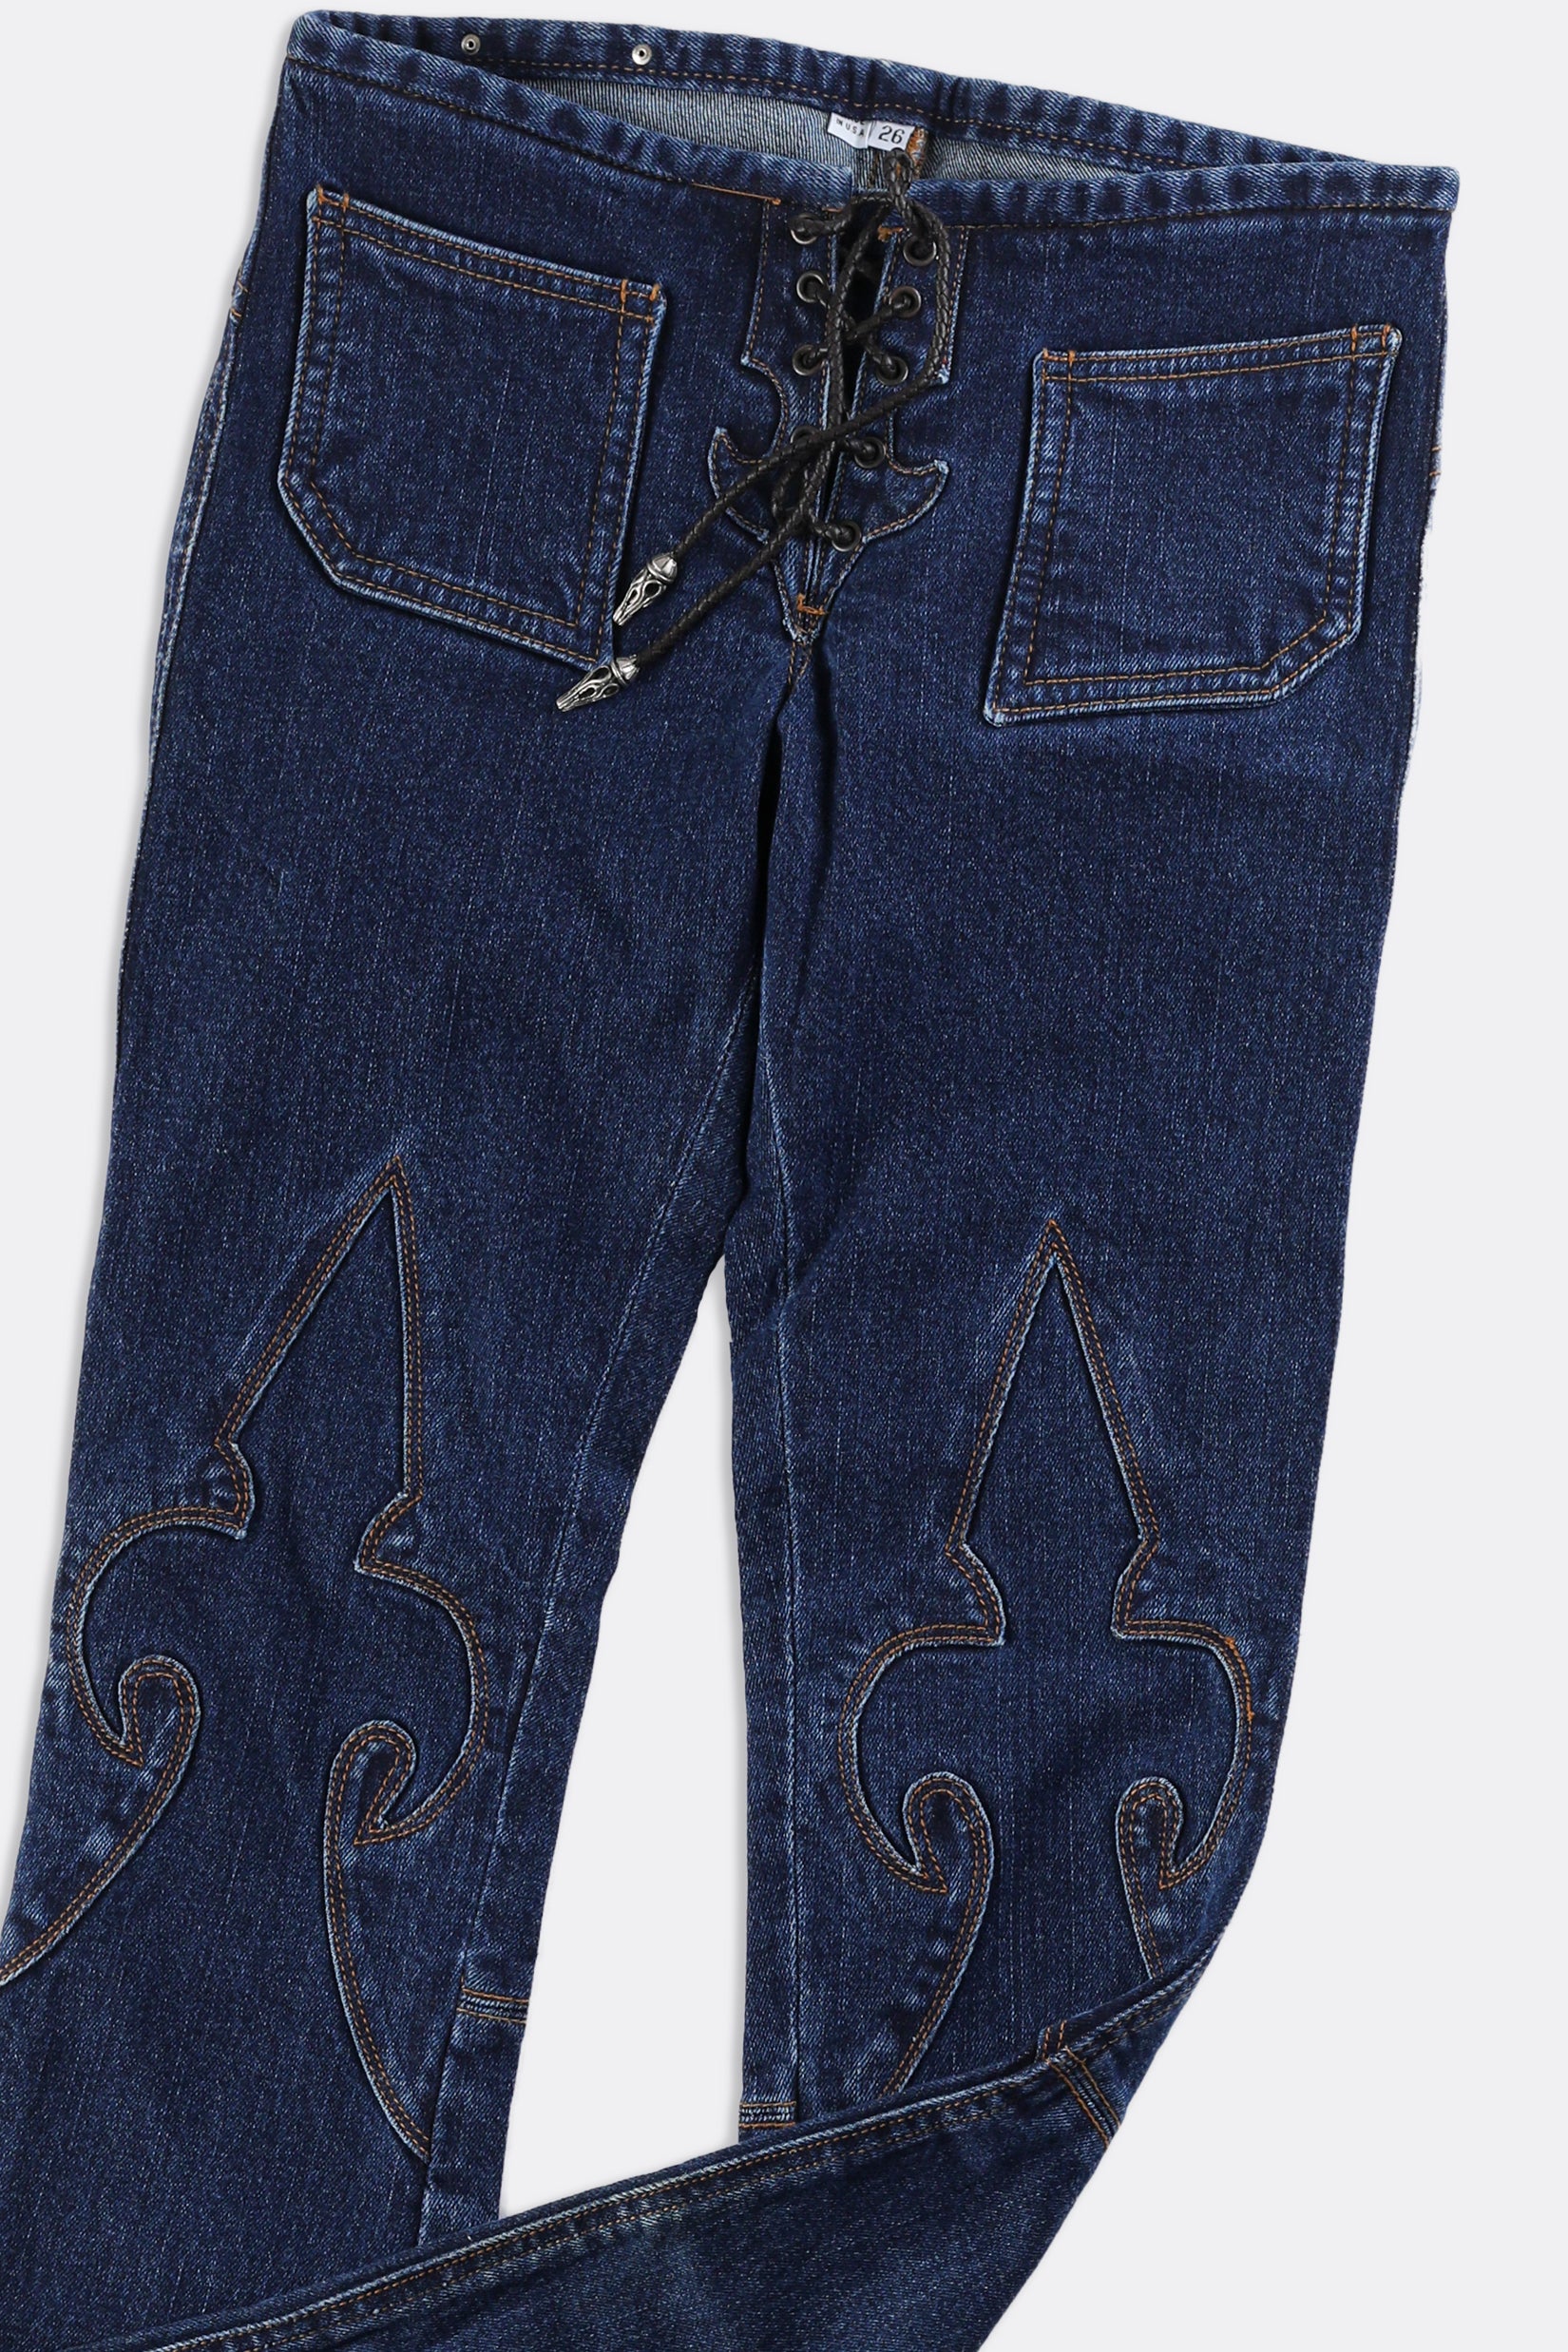 A limited edition of the Chrome Hearts Patch Leather Cross Jeans